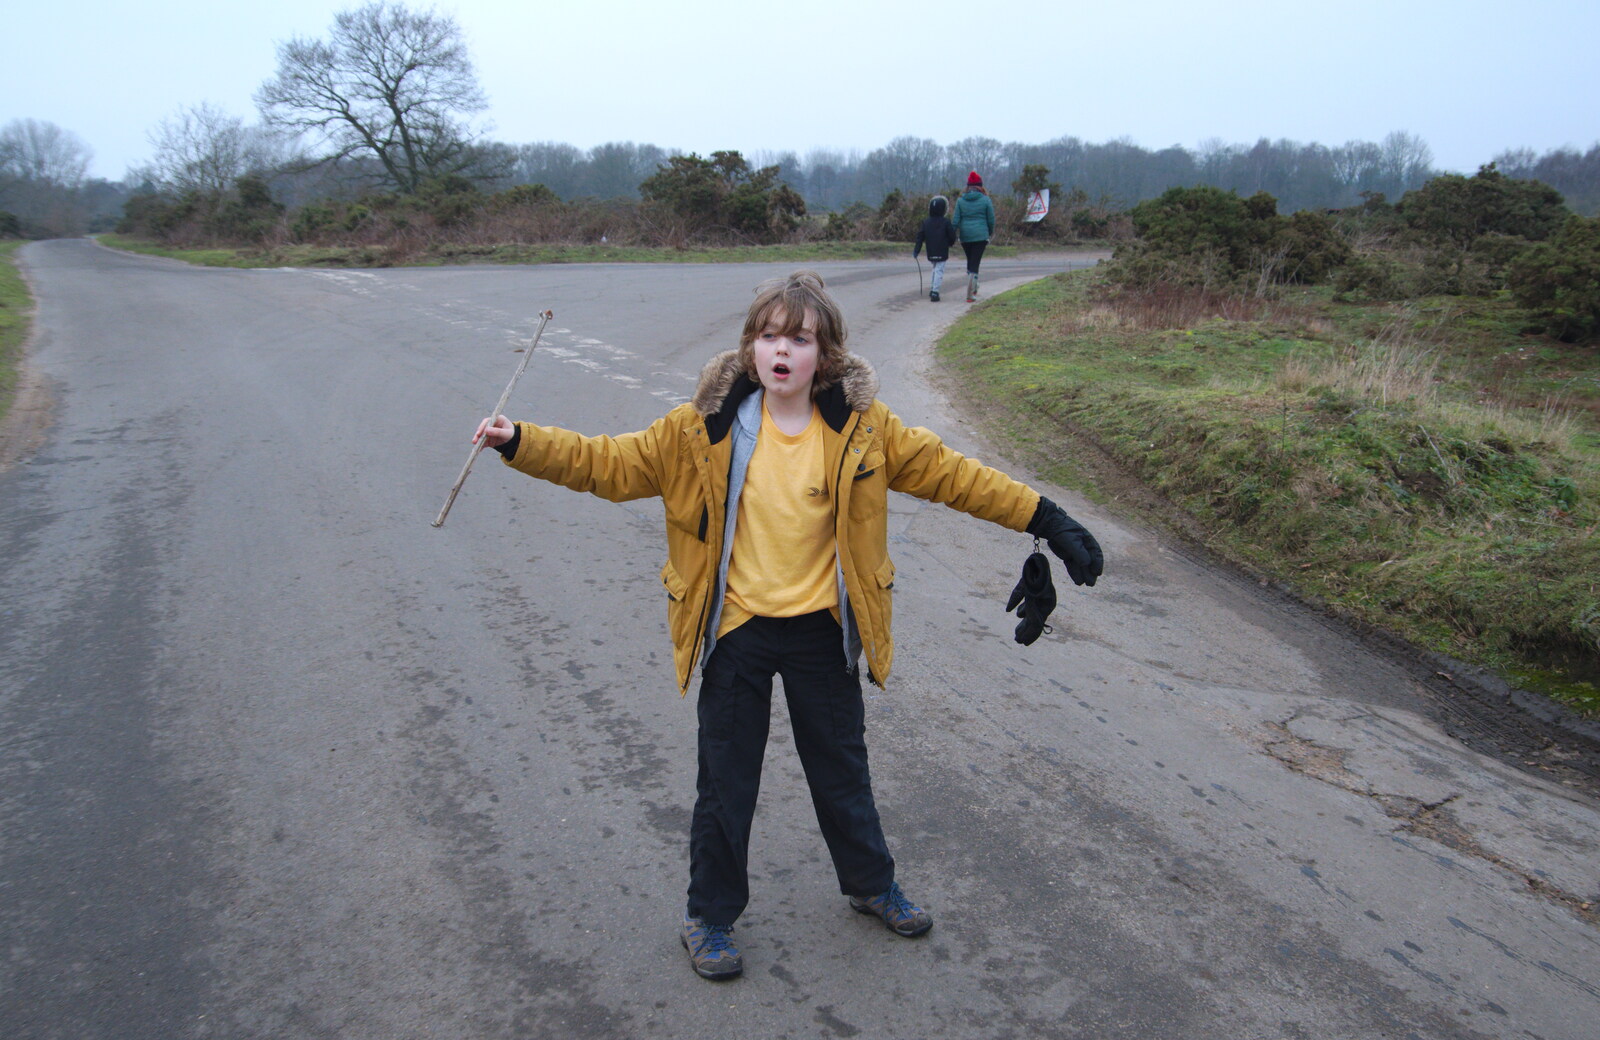 Fred's in the road from New Year's Day on the Ling, Wortham, Suffolk - 1st January 2020